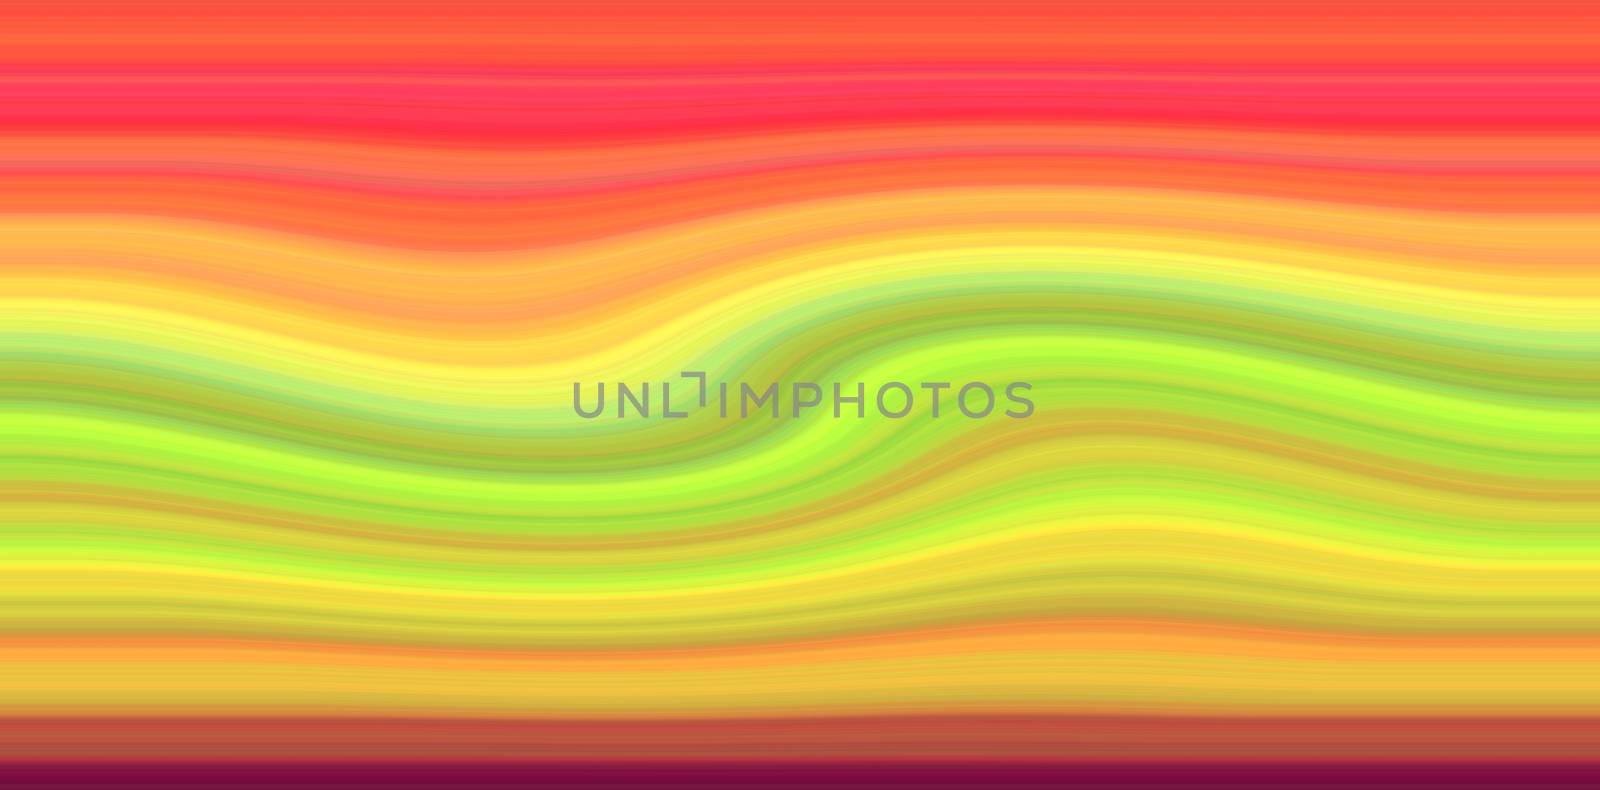 beautiful illustration of colored abstract background used for website